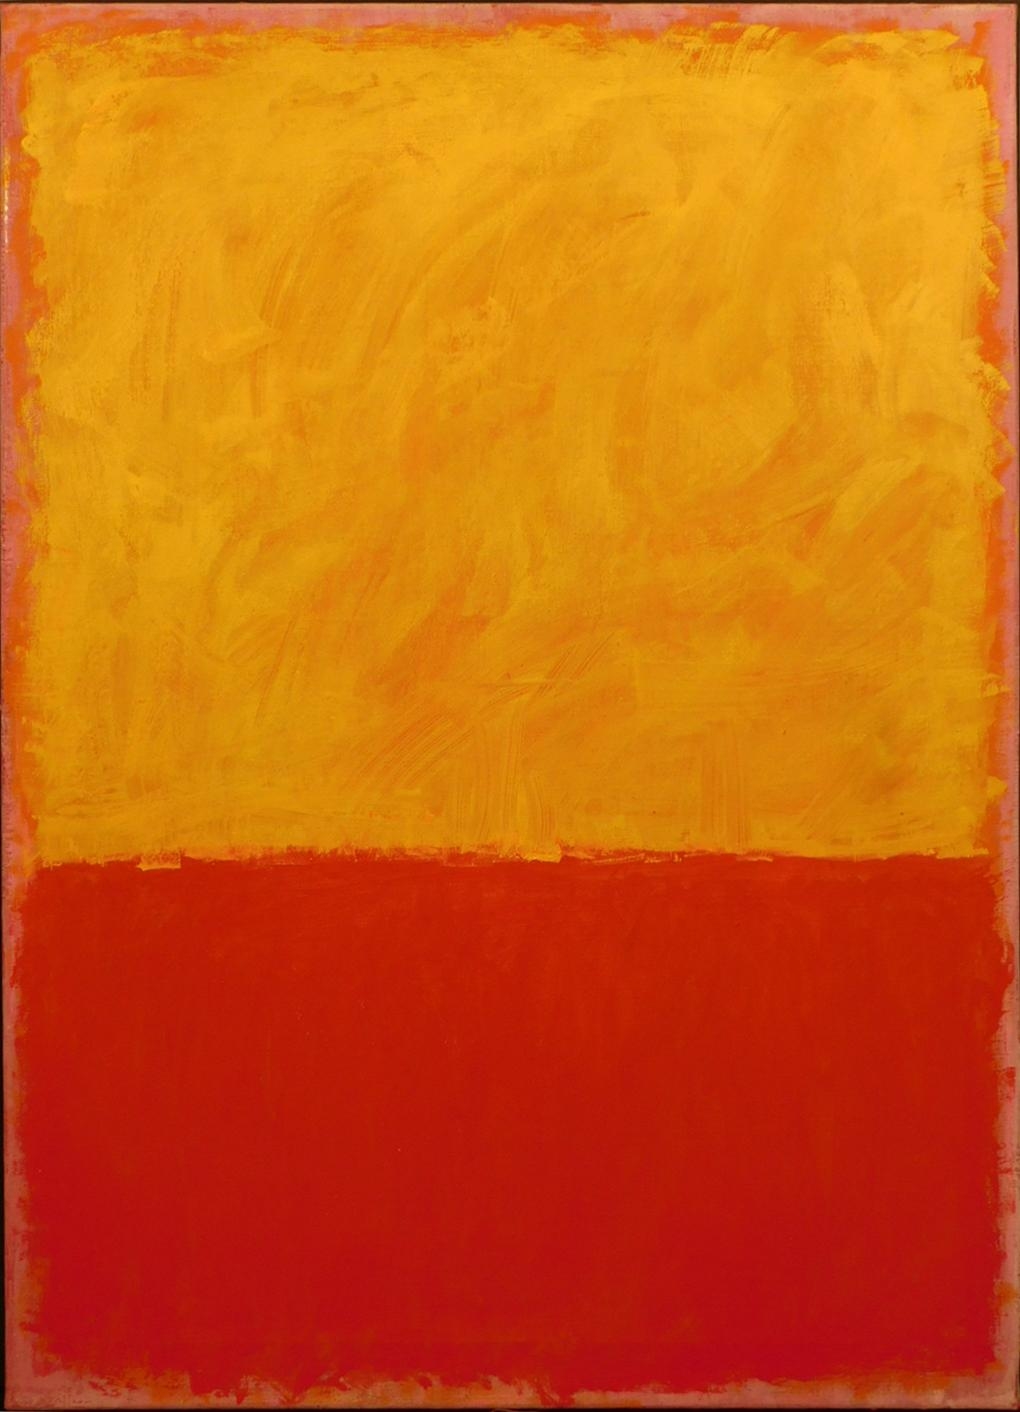 Color Field Painting (Red and Yellow) by Mark Rothko, 1968